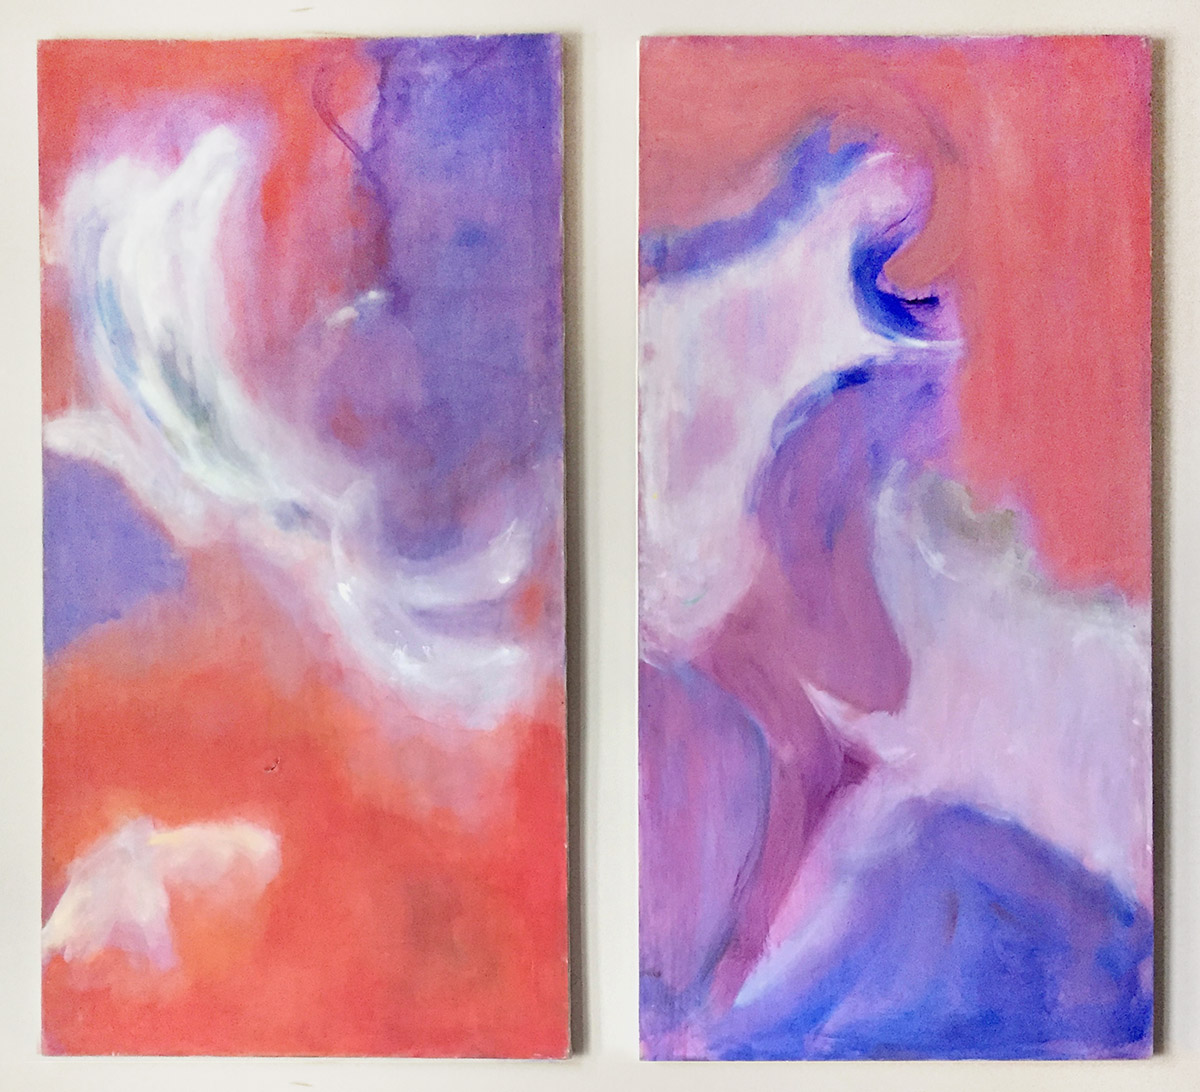 “Flight”, a two-panel diptych painting by Rhoda Netchinsky, 1993, acrylic on canvas.